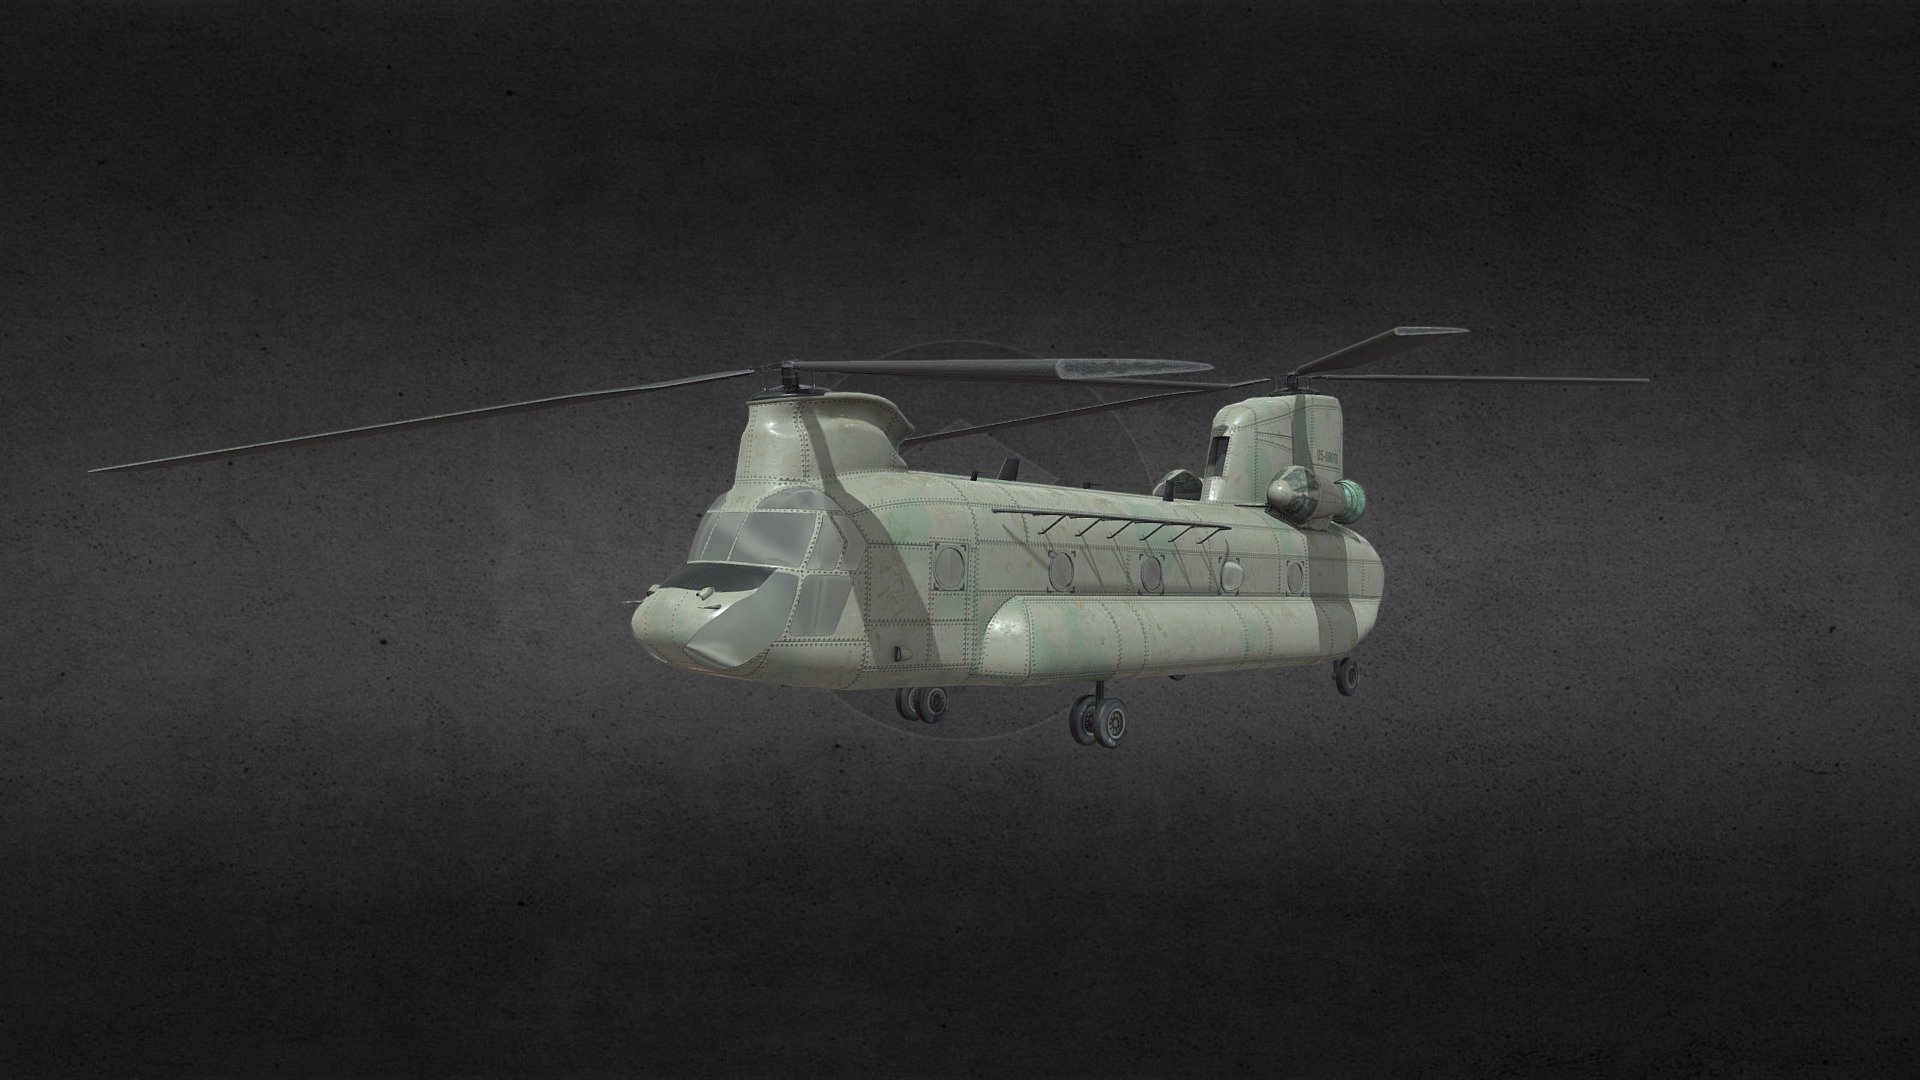 Very famous american helicopter. Around 30k tris, PBR setup includes: diffuse, roughness, AO and normal maps, all in 4K. Additional file includes 2 more 4k textures, flat grey and firefighter livery 3d model